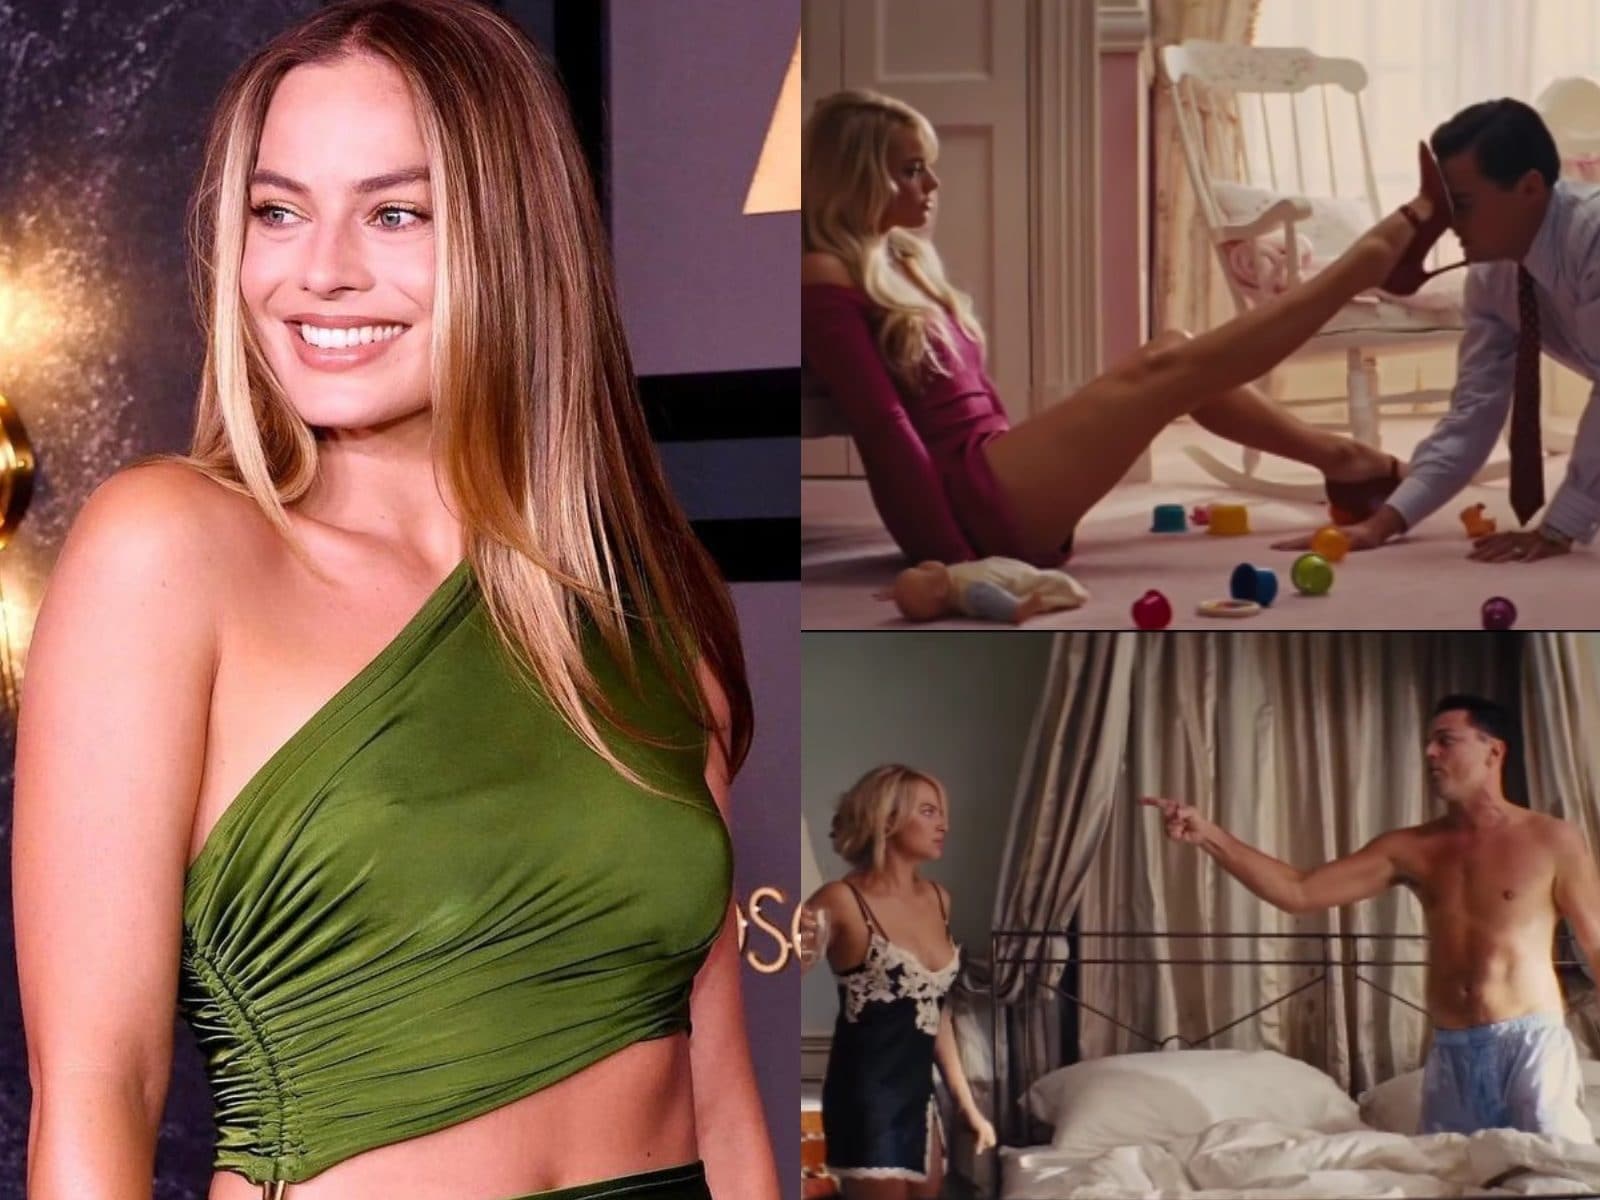 christie goddard recommends margot robbie nude wolf pic